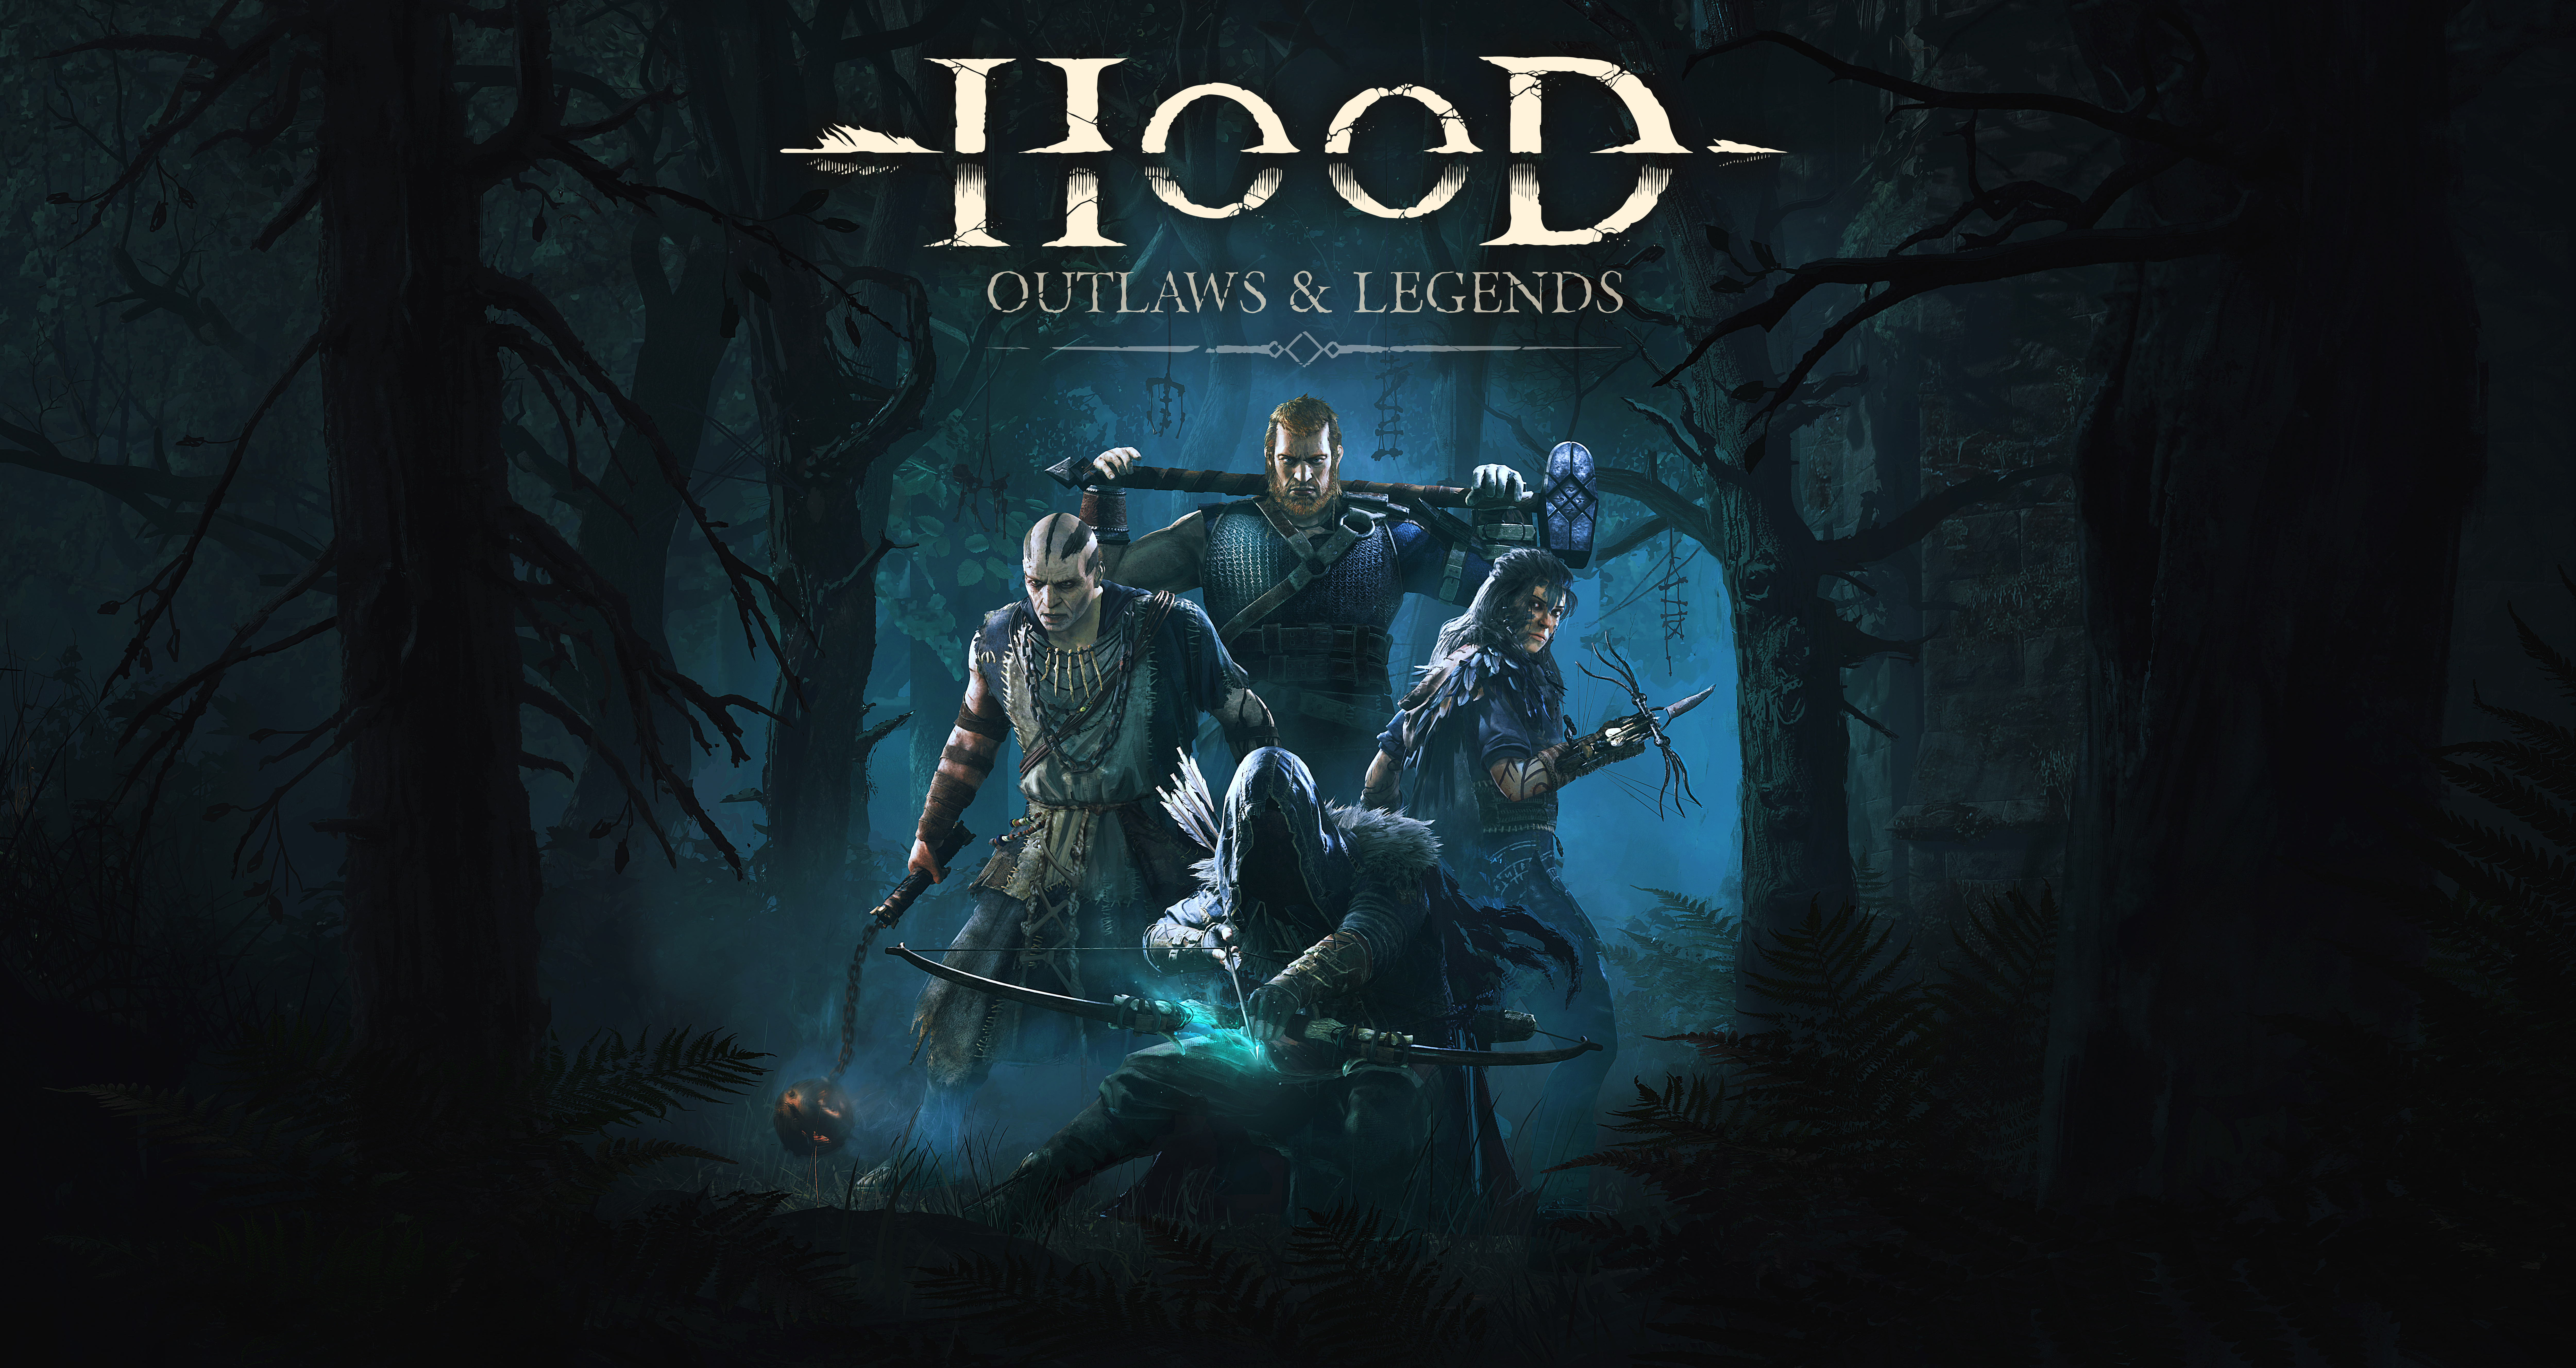 HD wallpaper featuring characters from Hood: Outlaws & Legends video game with a dark forest backdrop for desktop background.